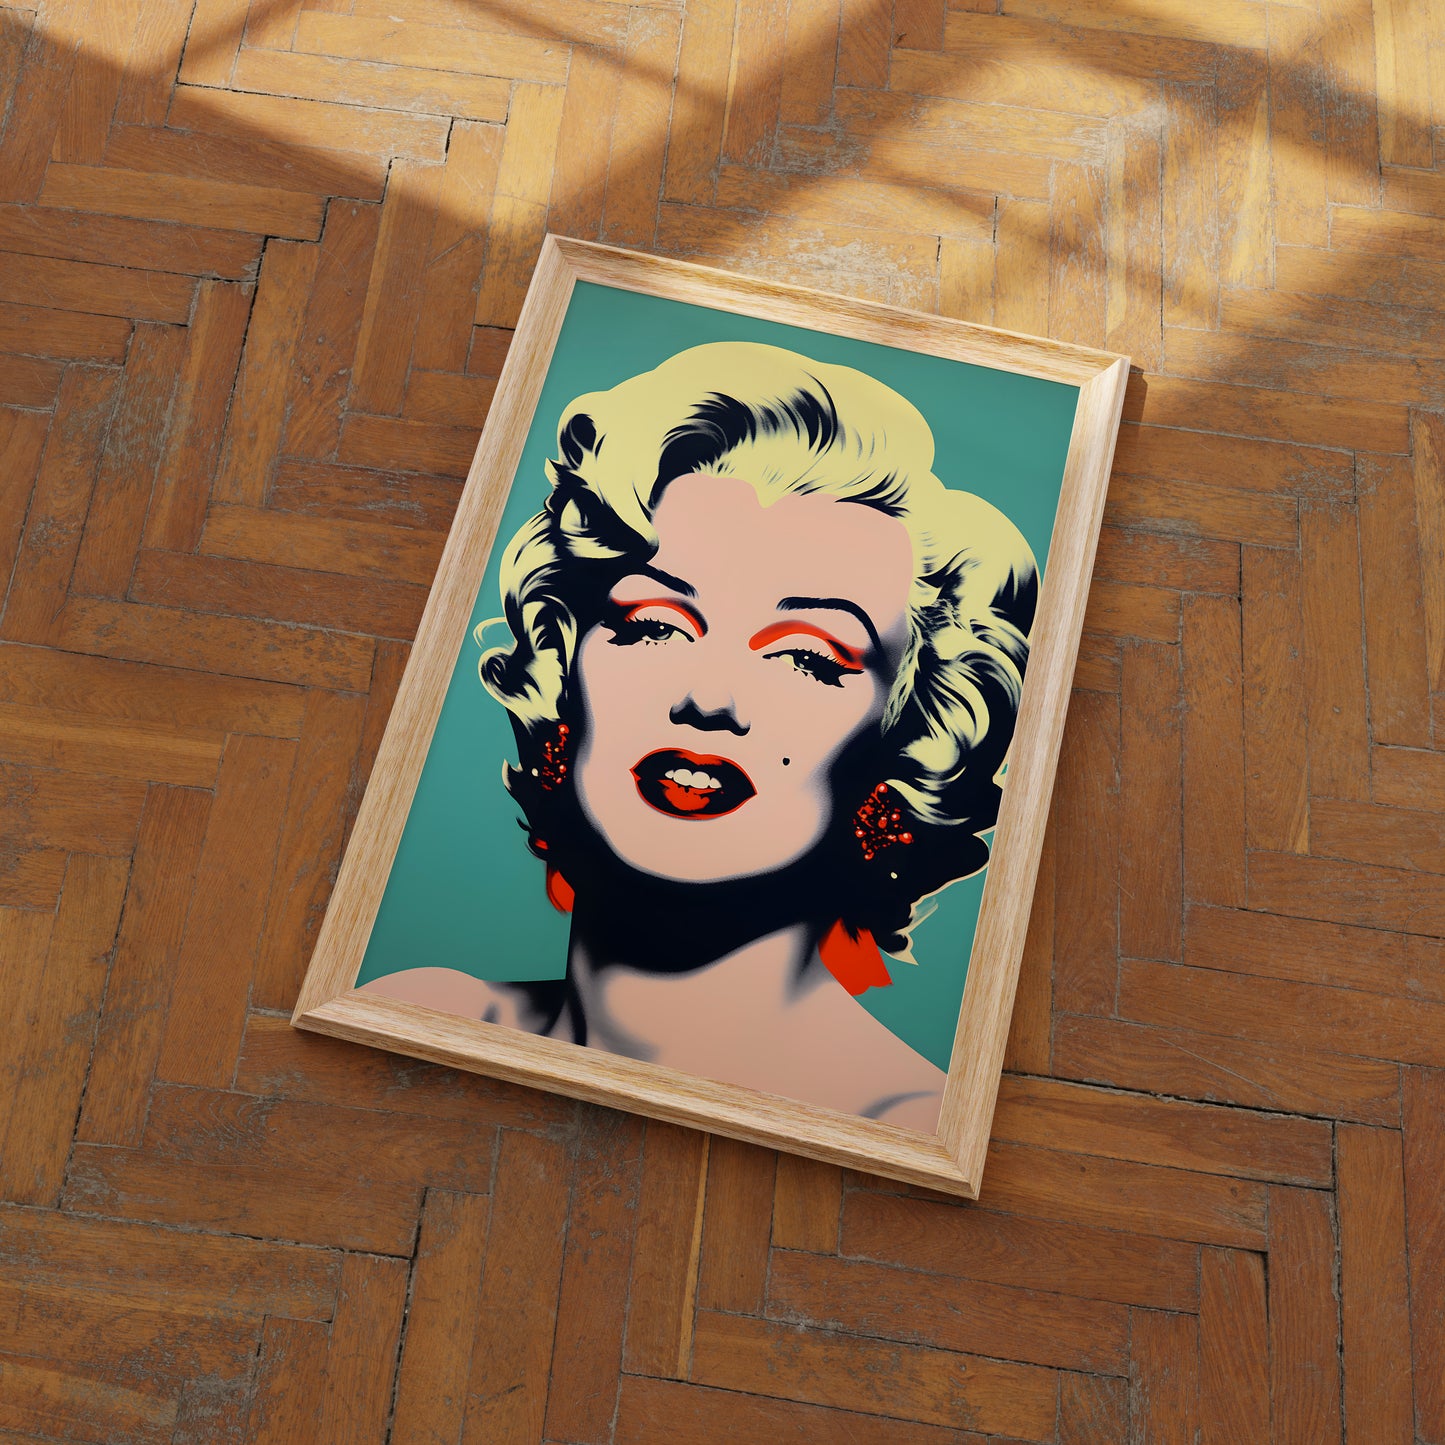 Pop art style portrait of a woman on a framed canvas lying on a wooden floor.